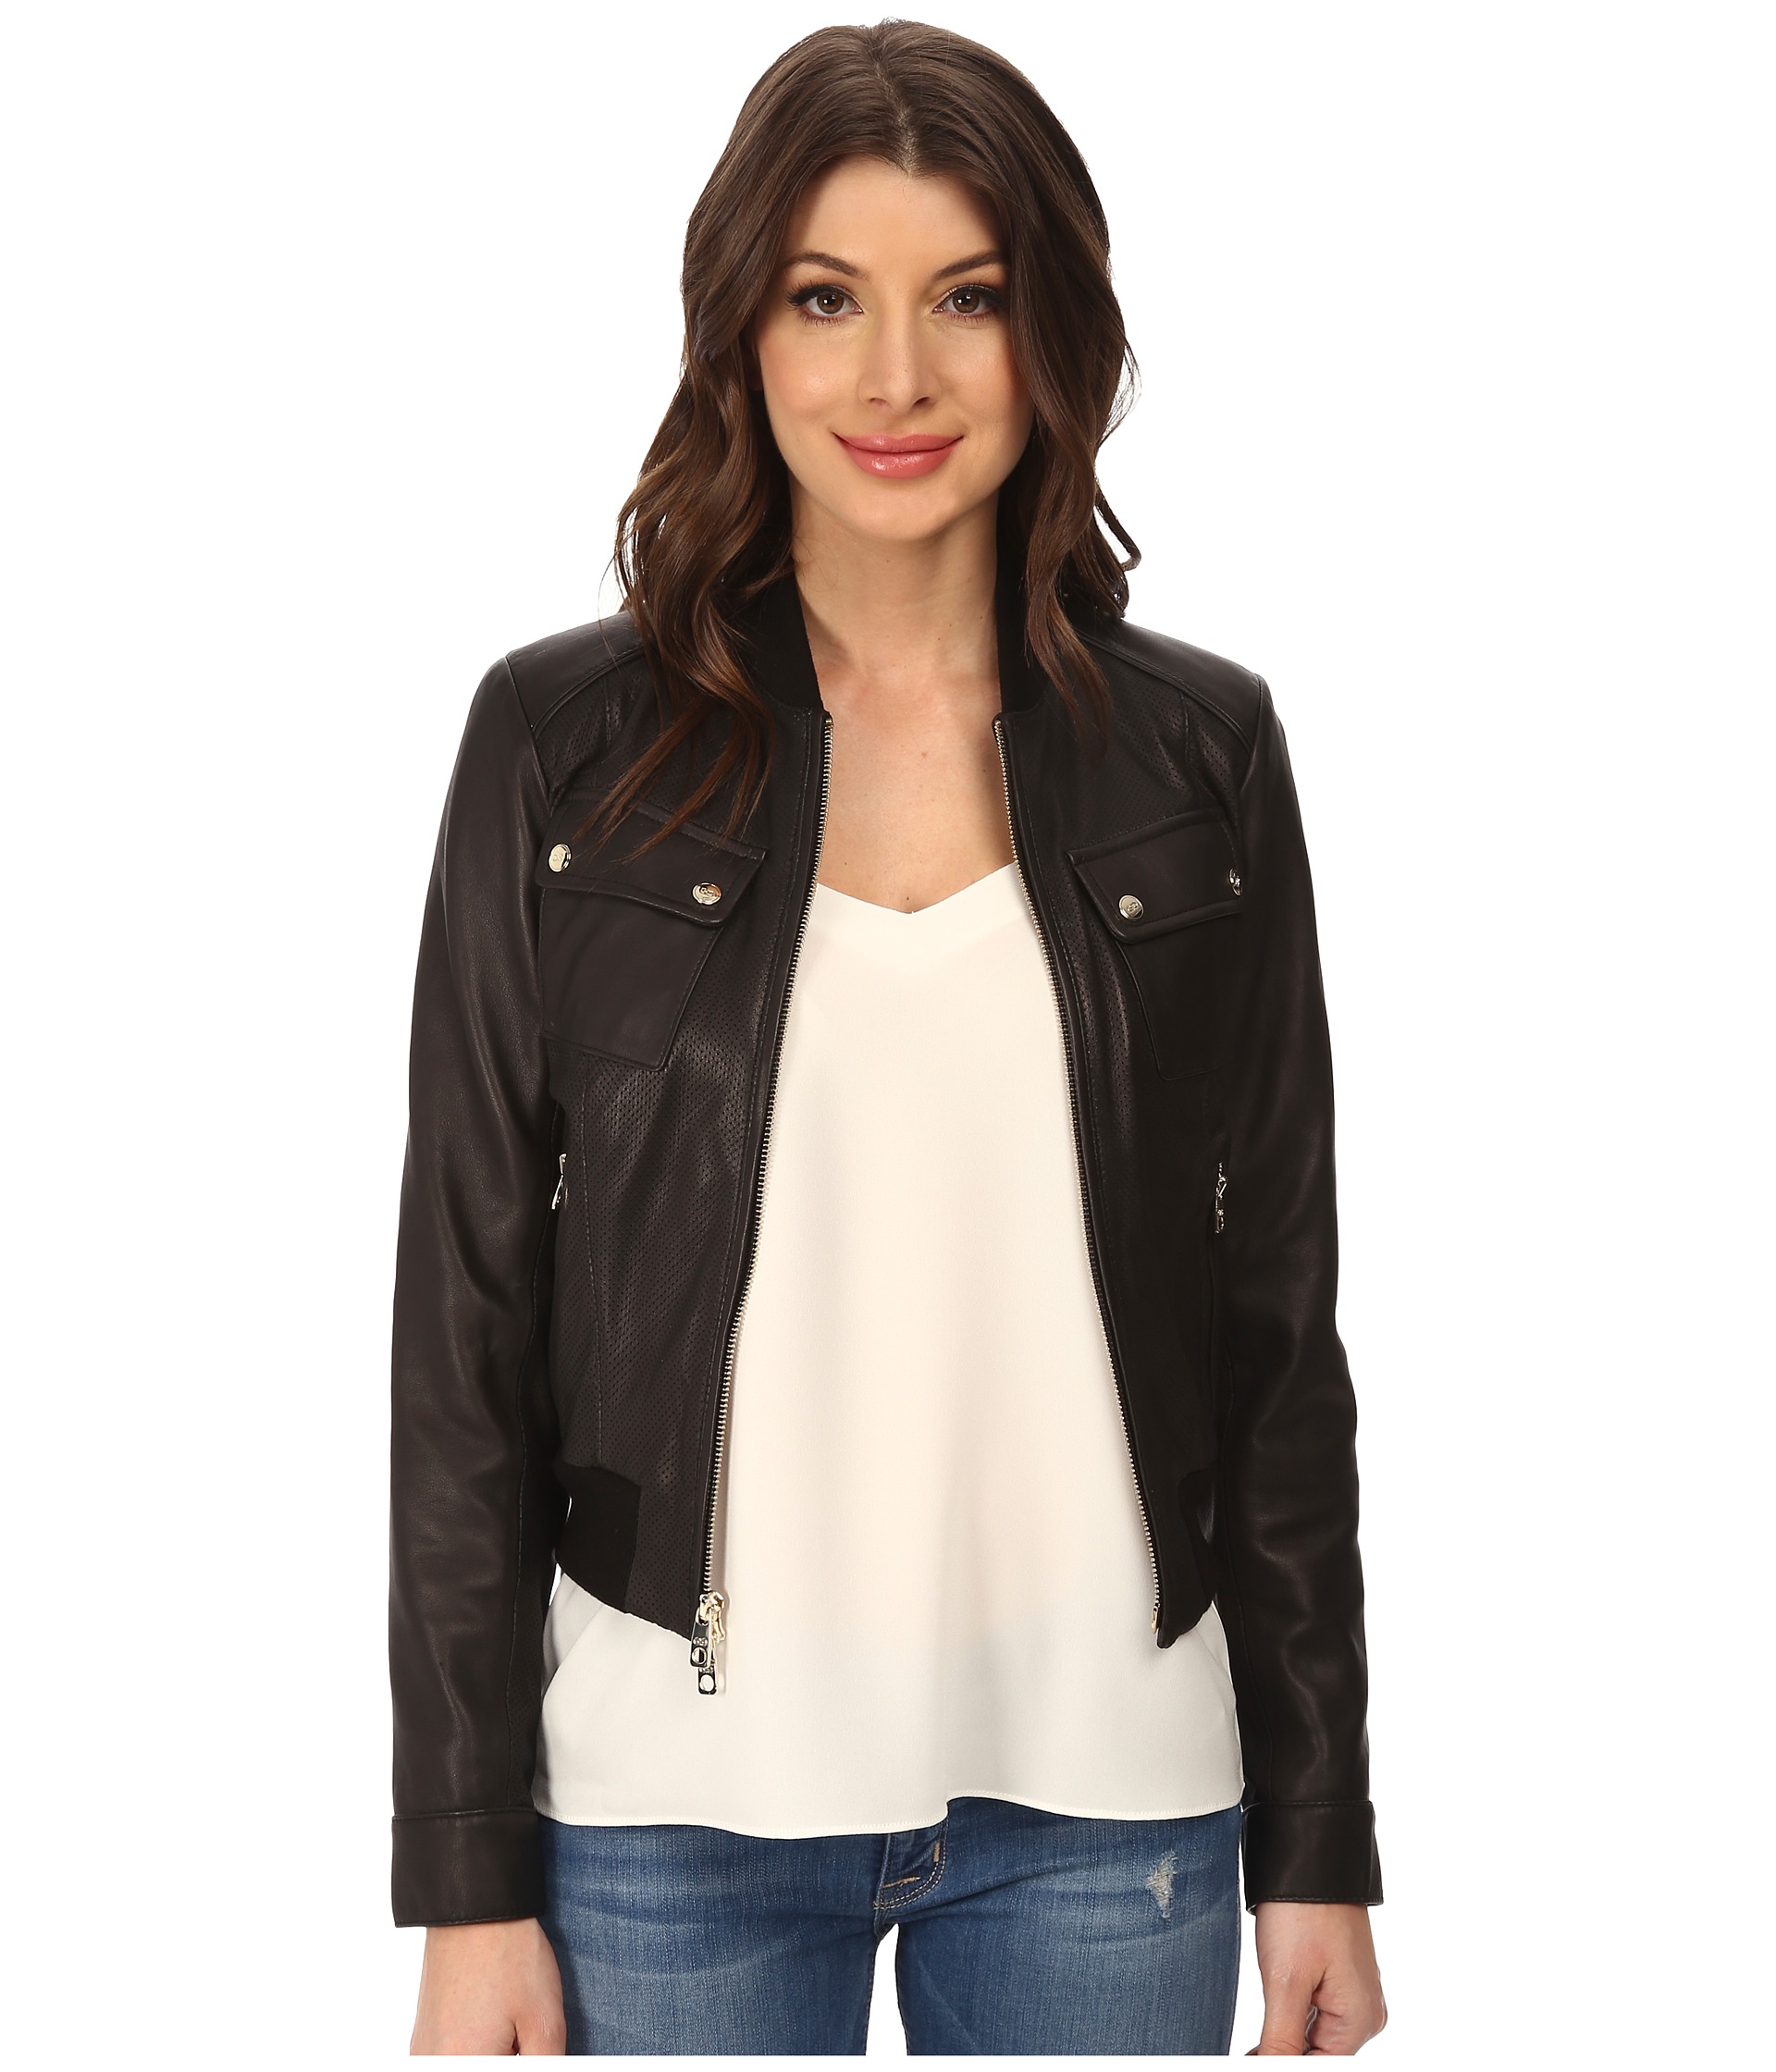 Collection Women S Bomber Leather Jacket Pictures - The Fashions ...